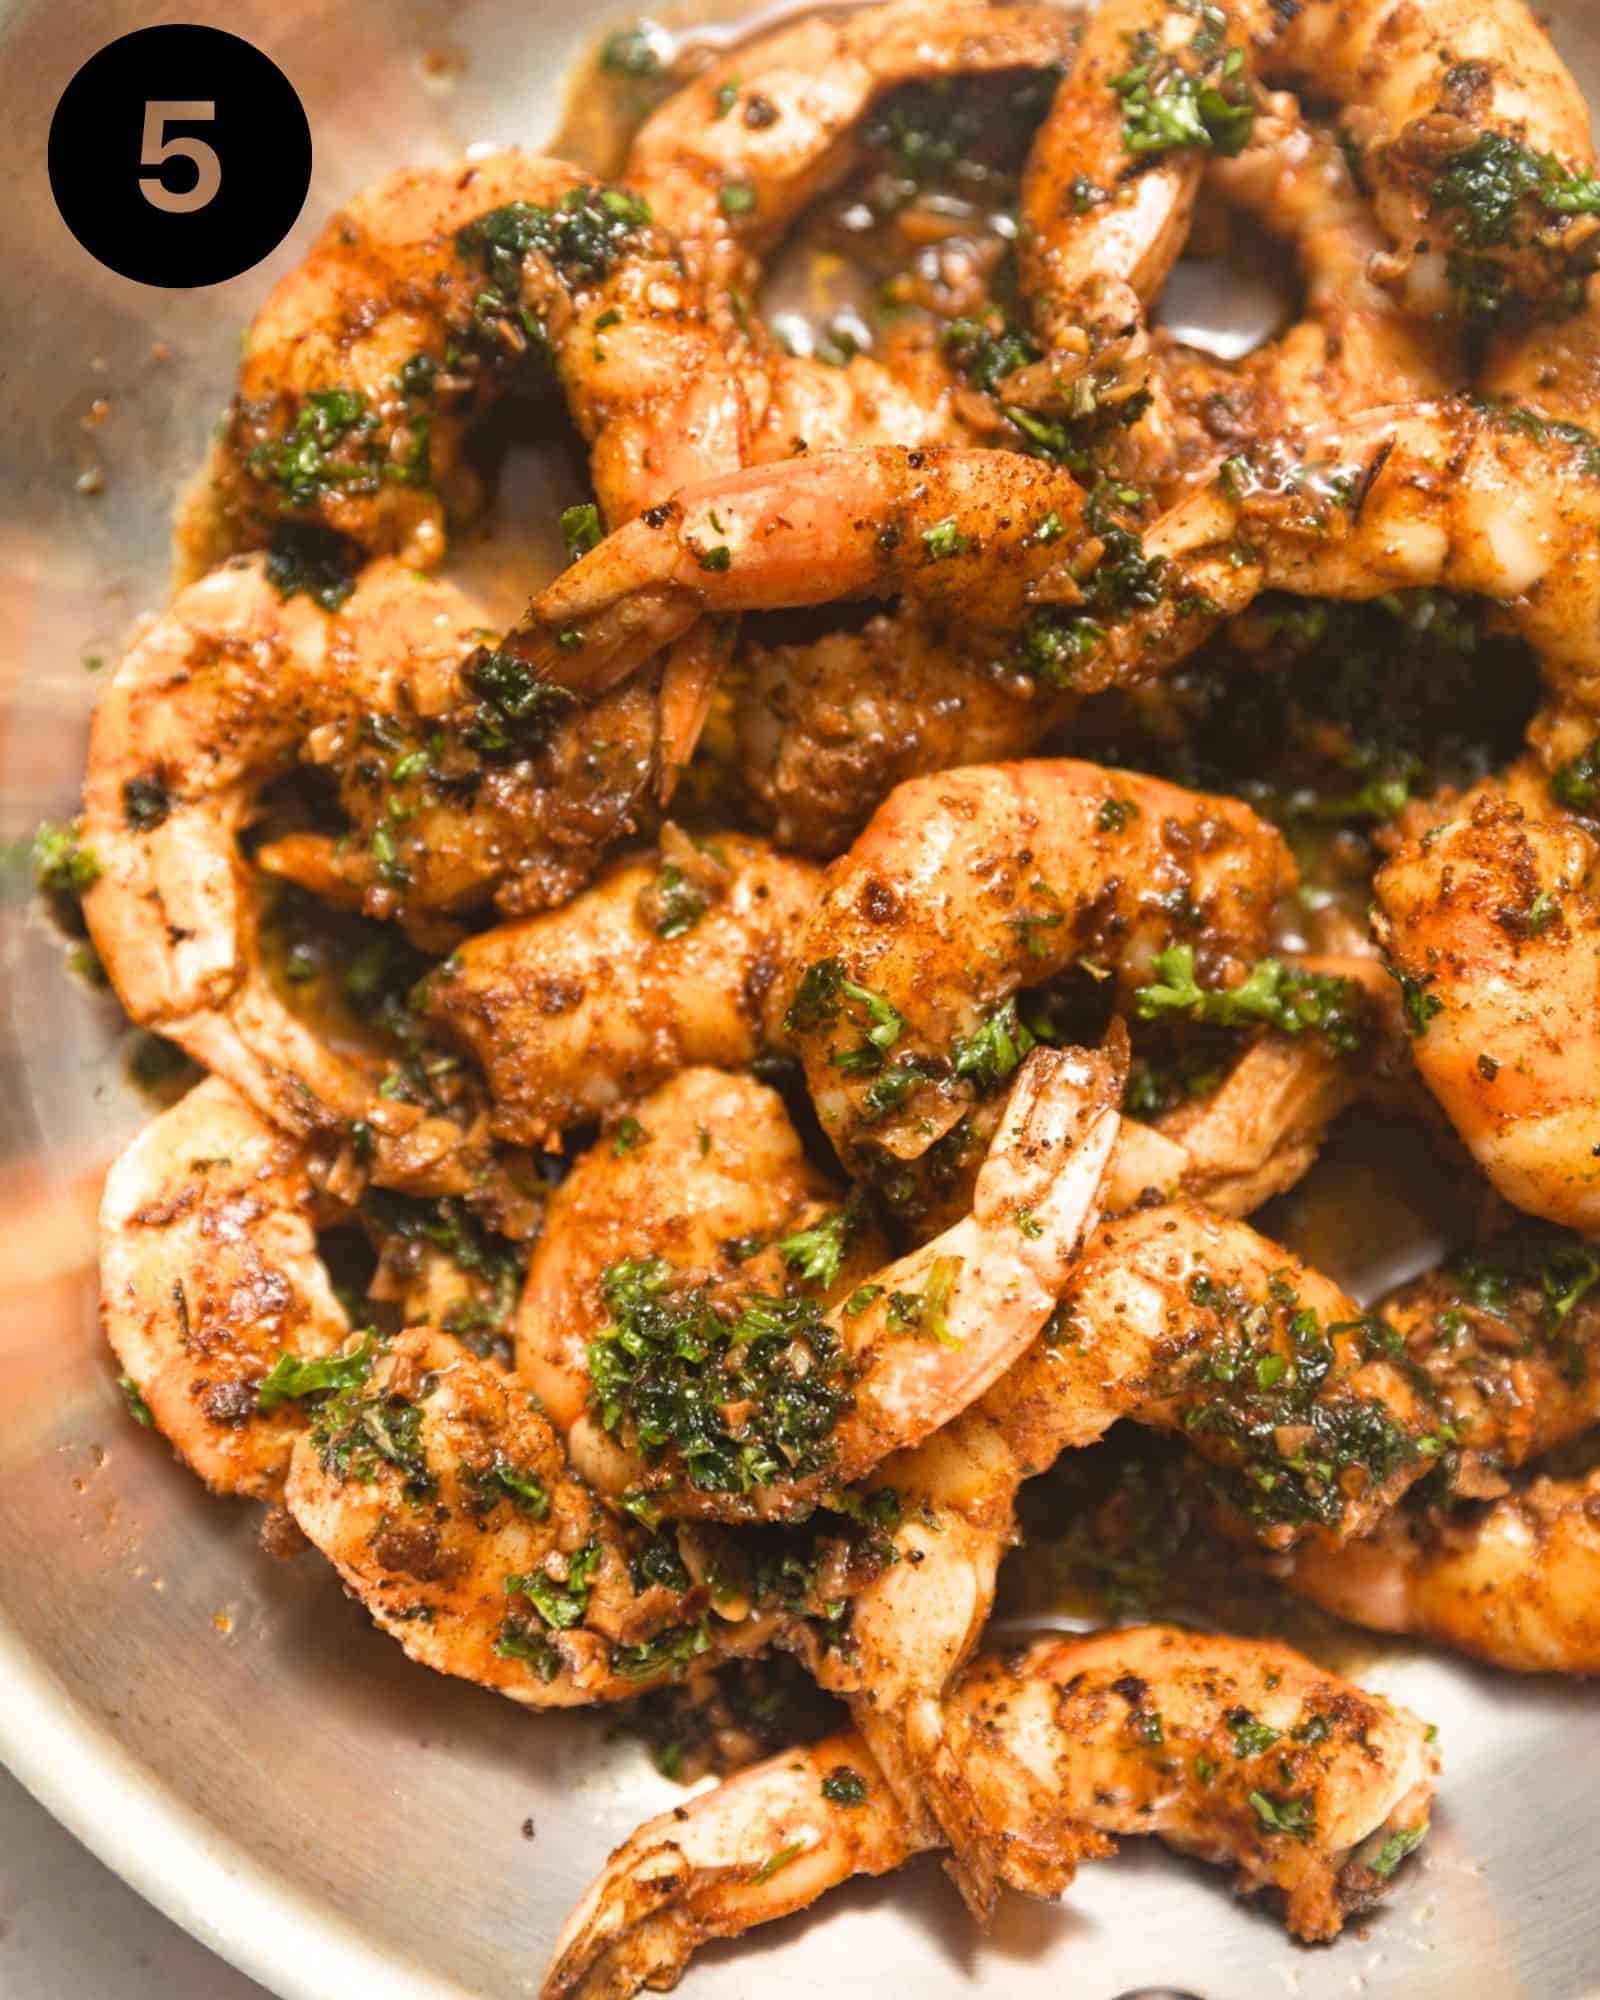 pan seared shrimp in a stainless steel pan coated with garlic butter sauce.